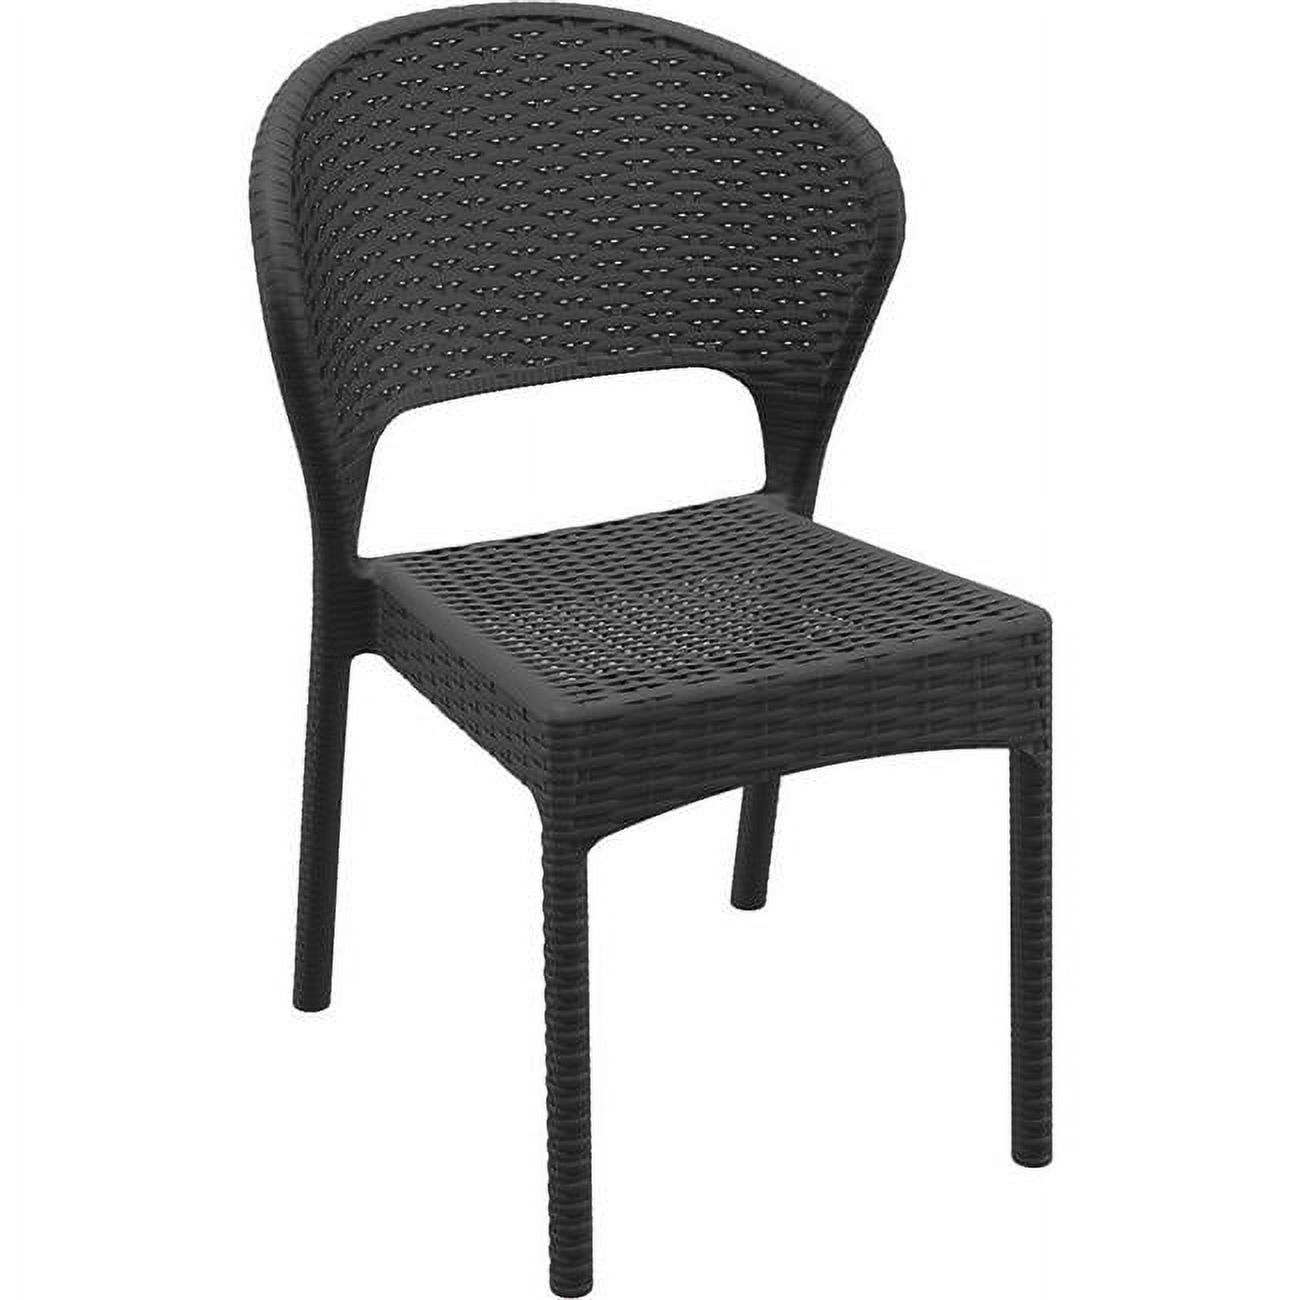 Compamia Dayton Resin Wickerlook Dining Chair 2 Pack Dark Gray - image 1 of 9